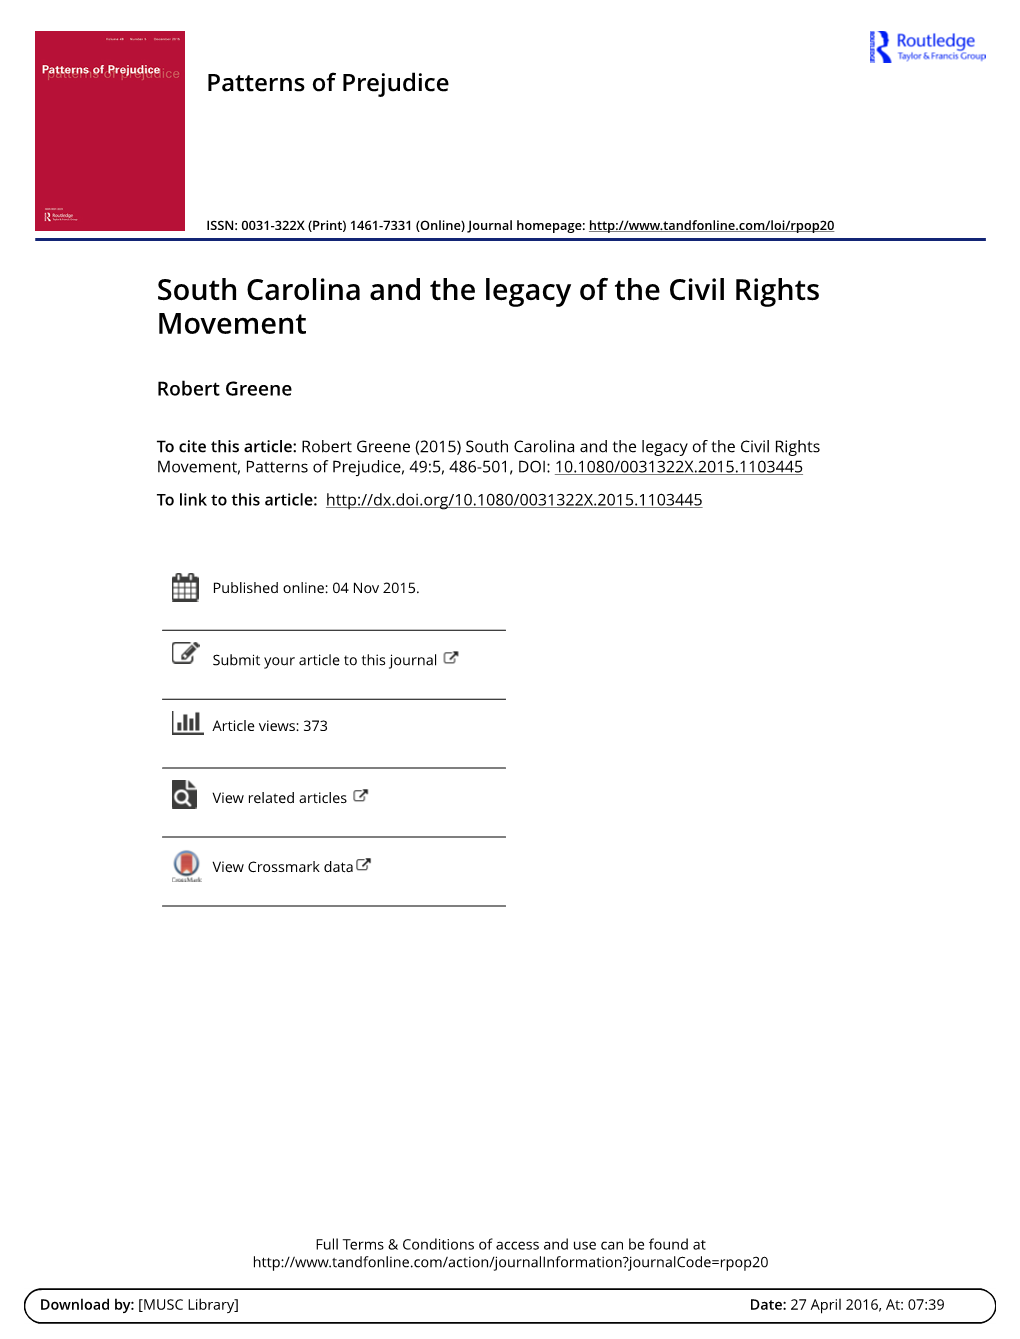 South Carolina and the Legacy of the Civil Rights Movement